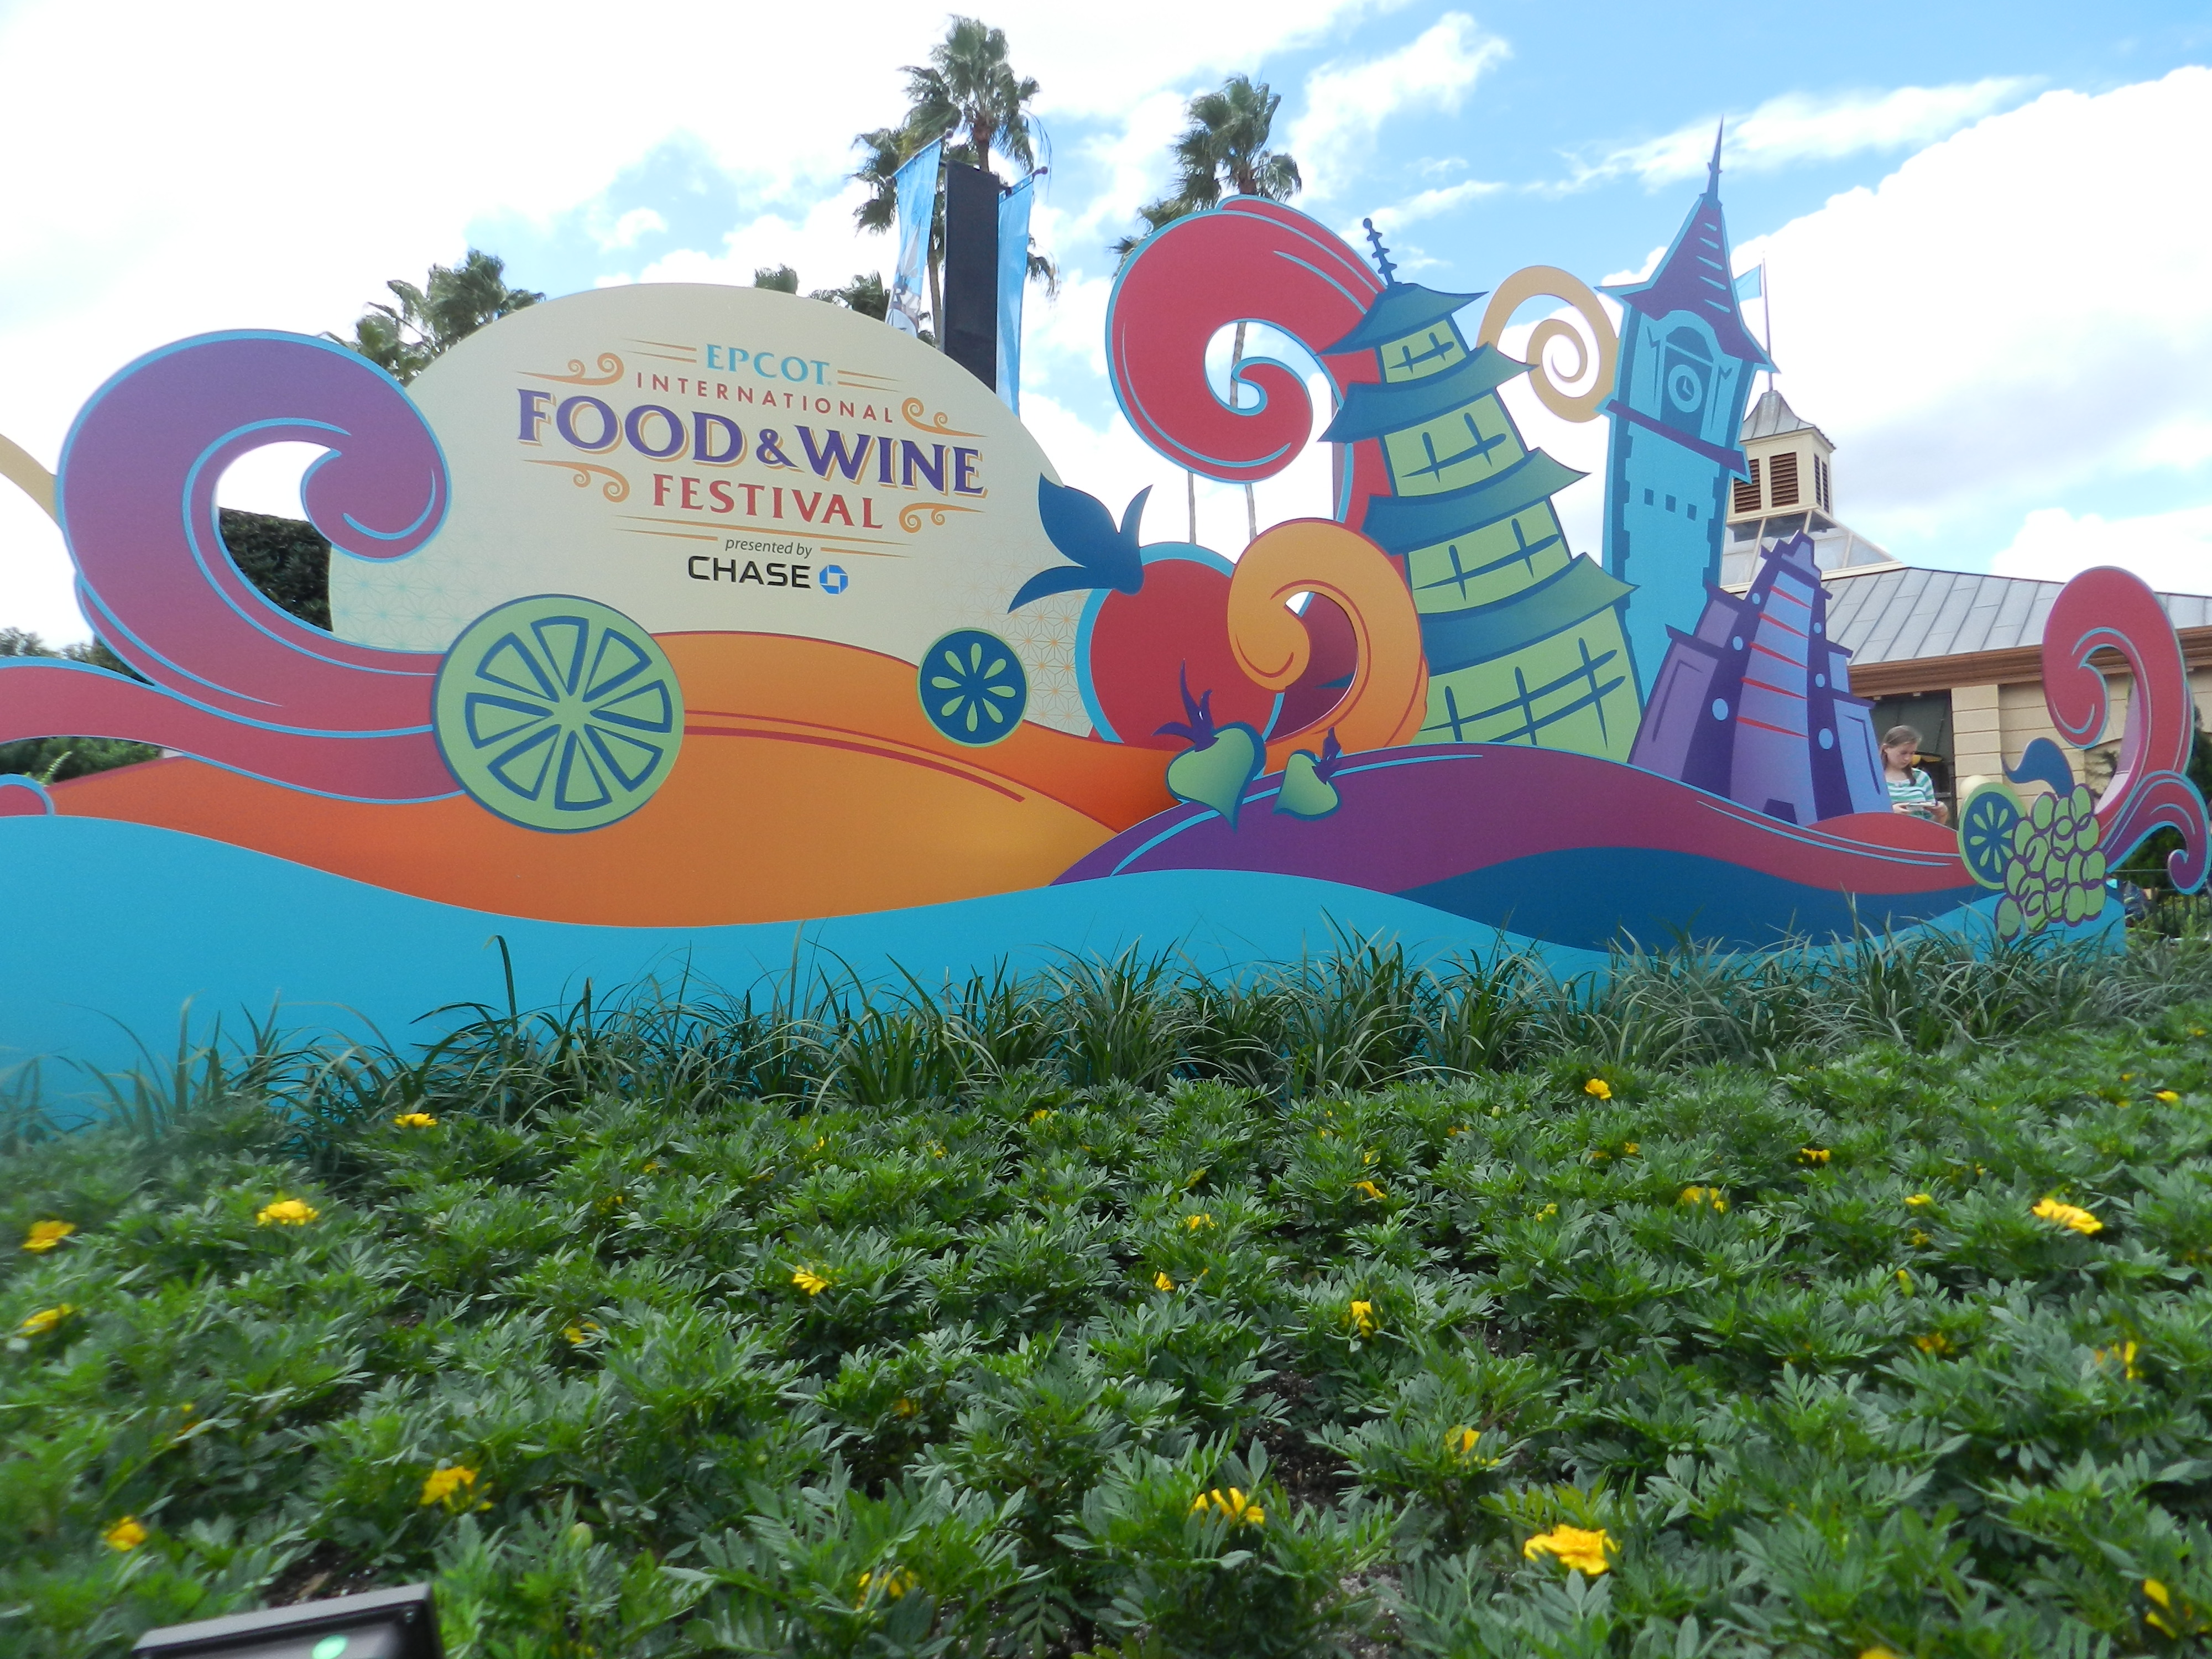 Theme Park Guide to the Best Food at Epcot Food and Wine Festival at Walt Disney World.